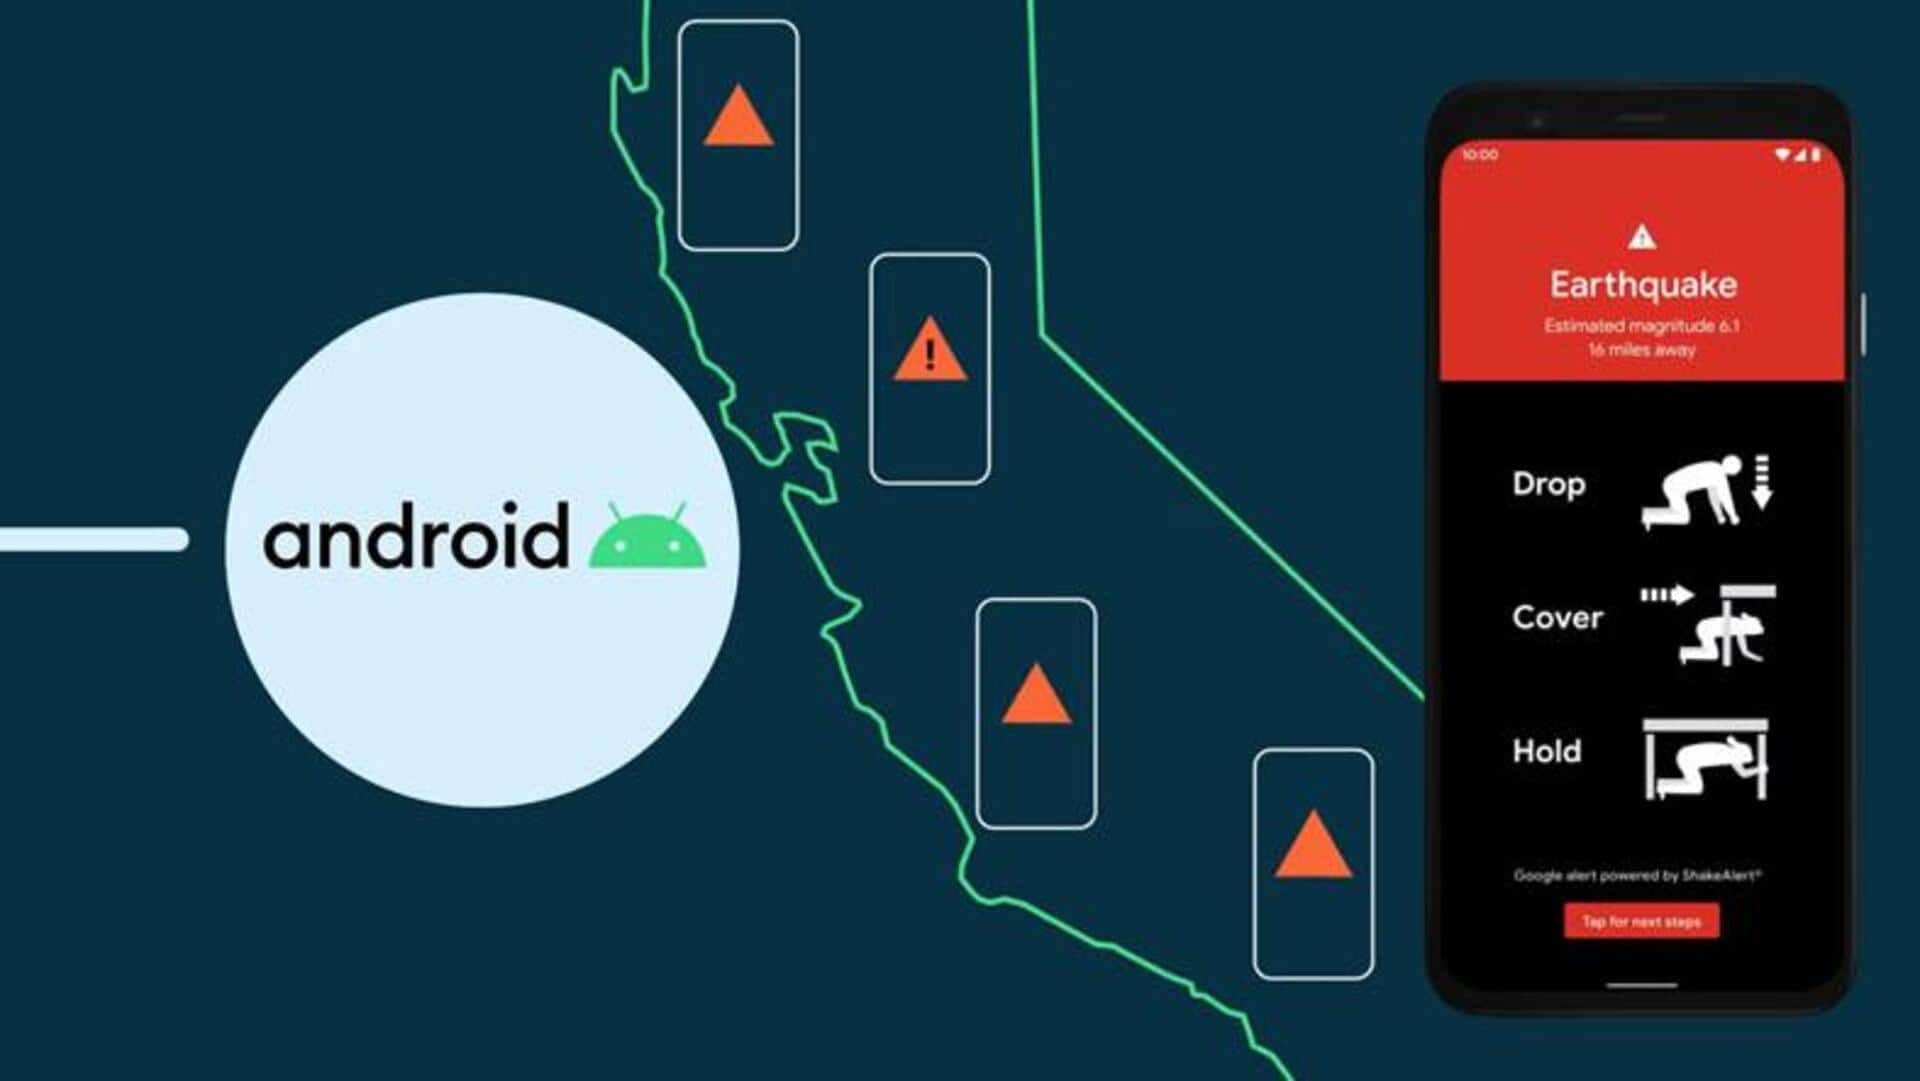 Google launches earthquake alert system in India: How to enable